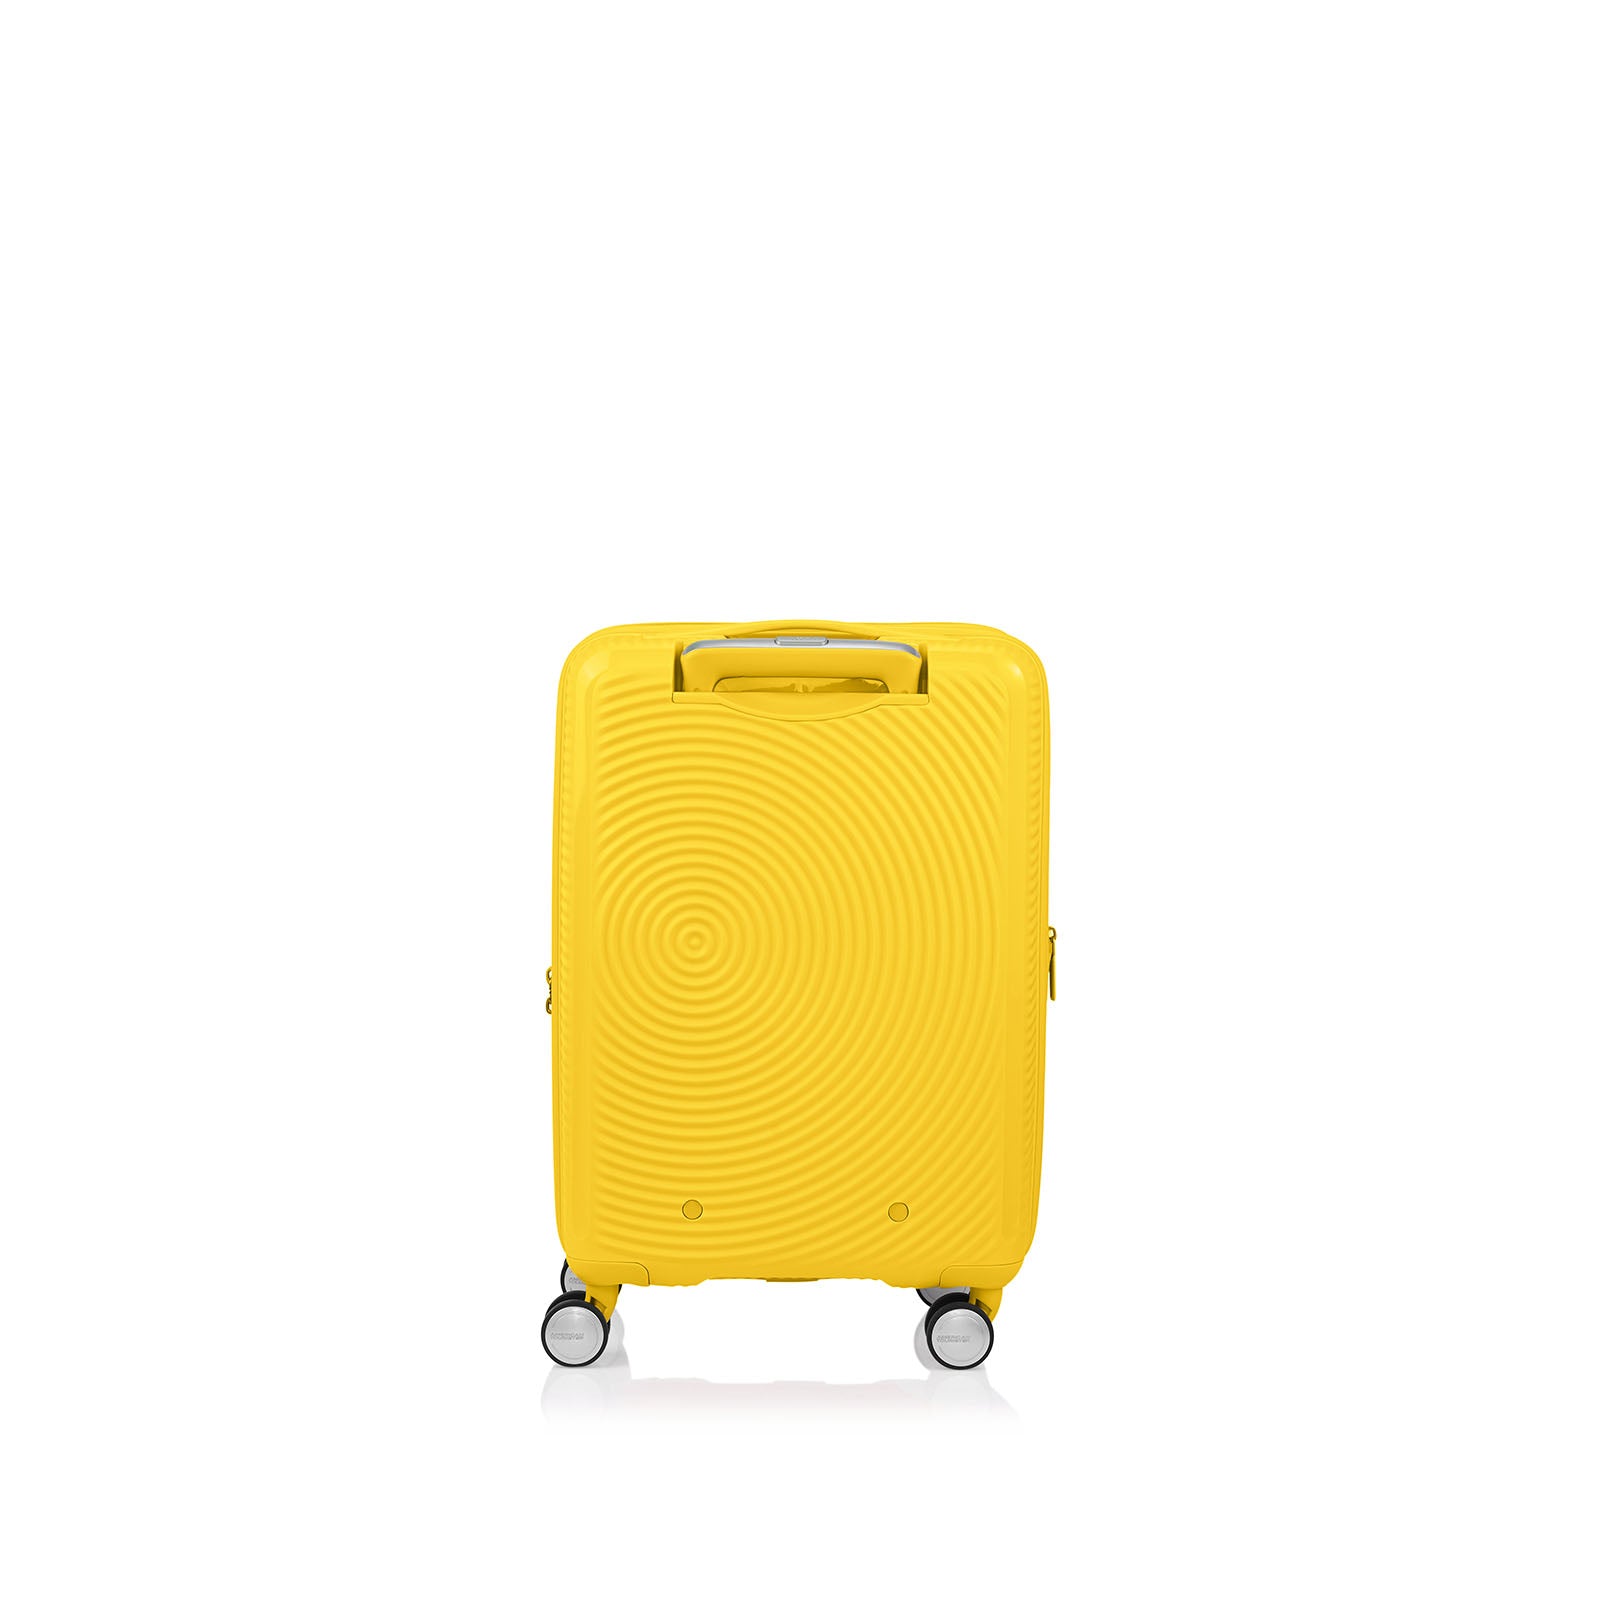 American-Tourister-Curio-2-55cm-Carry-On-Suitcase-Golden-Yellow-Back